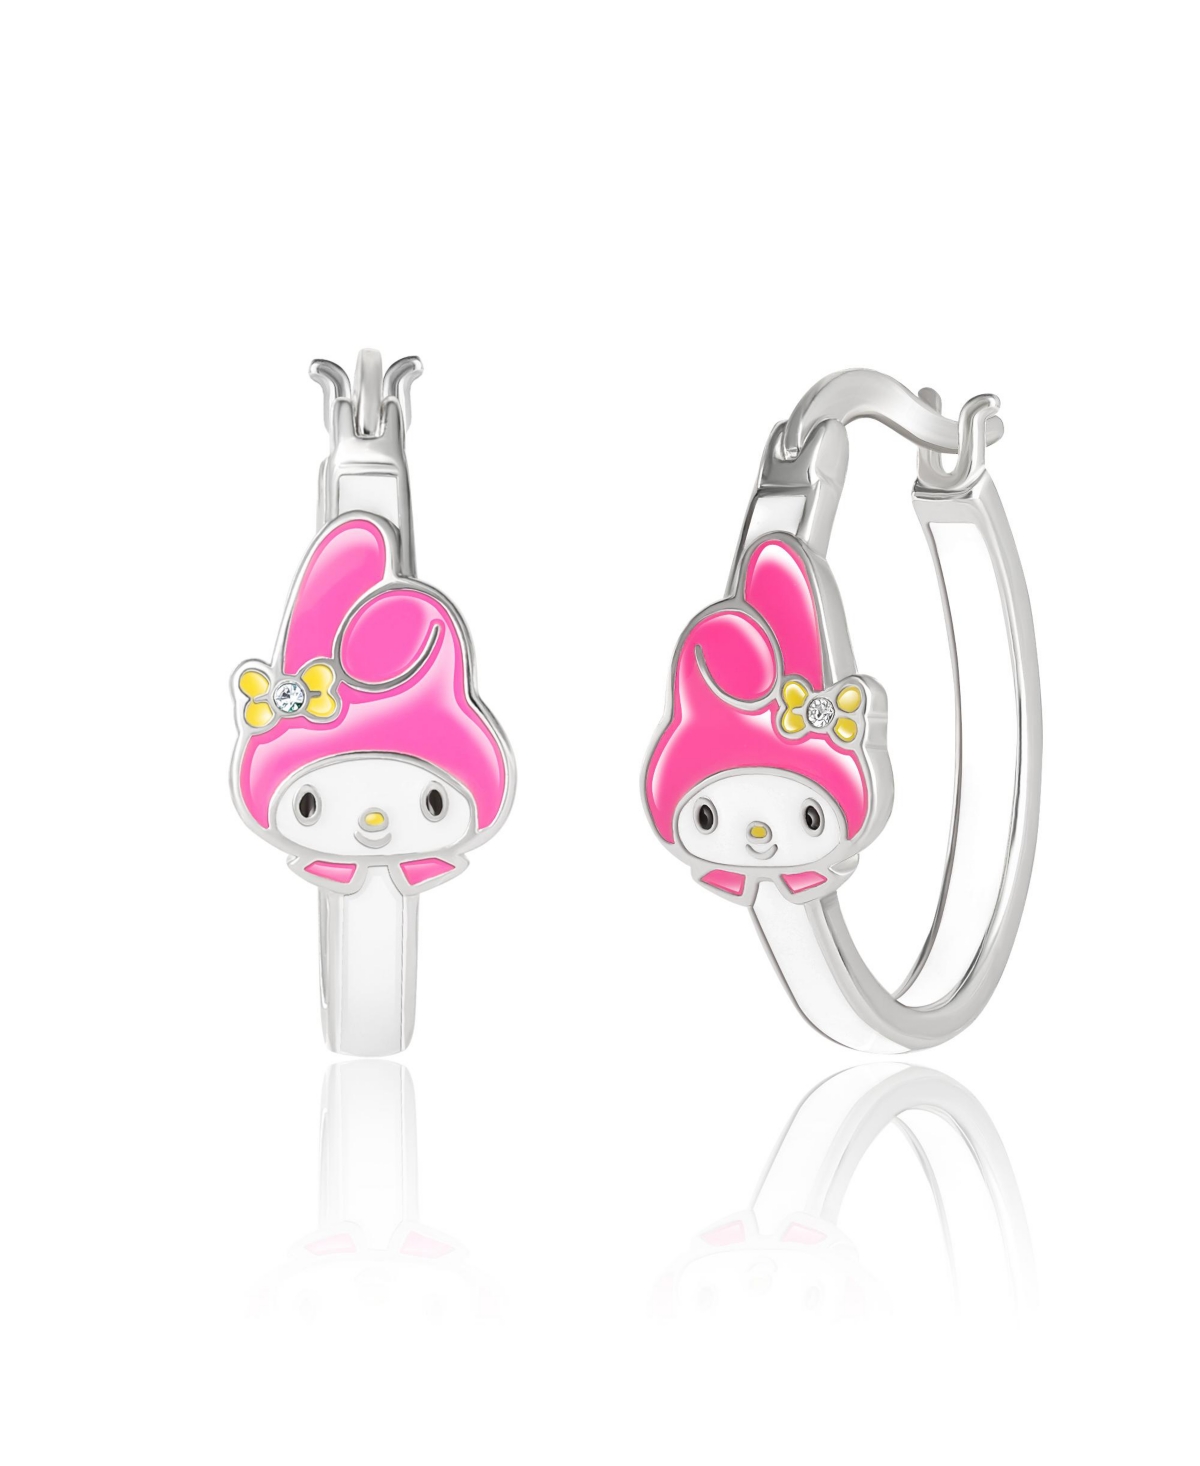 Sanrio Silver Plated Enamel Hoop Earrings Officially Licensed - My Melody Pink - Pink, white